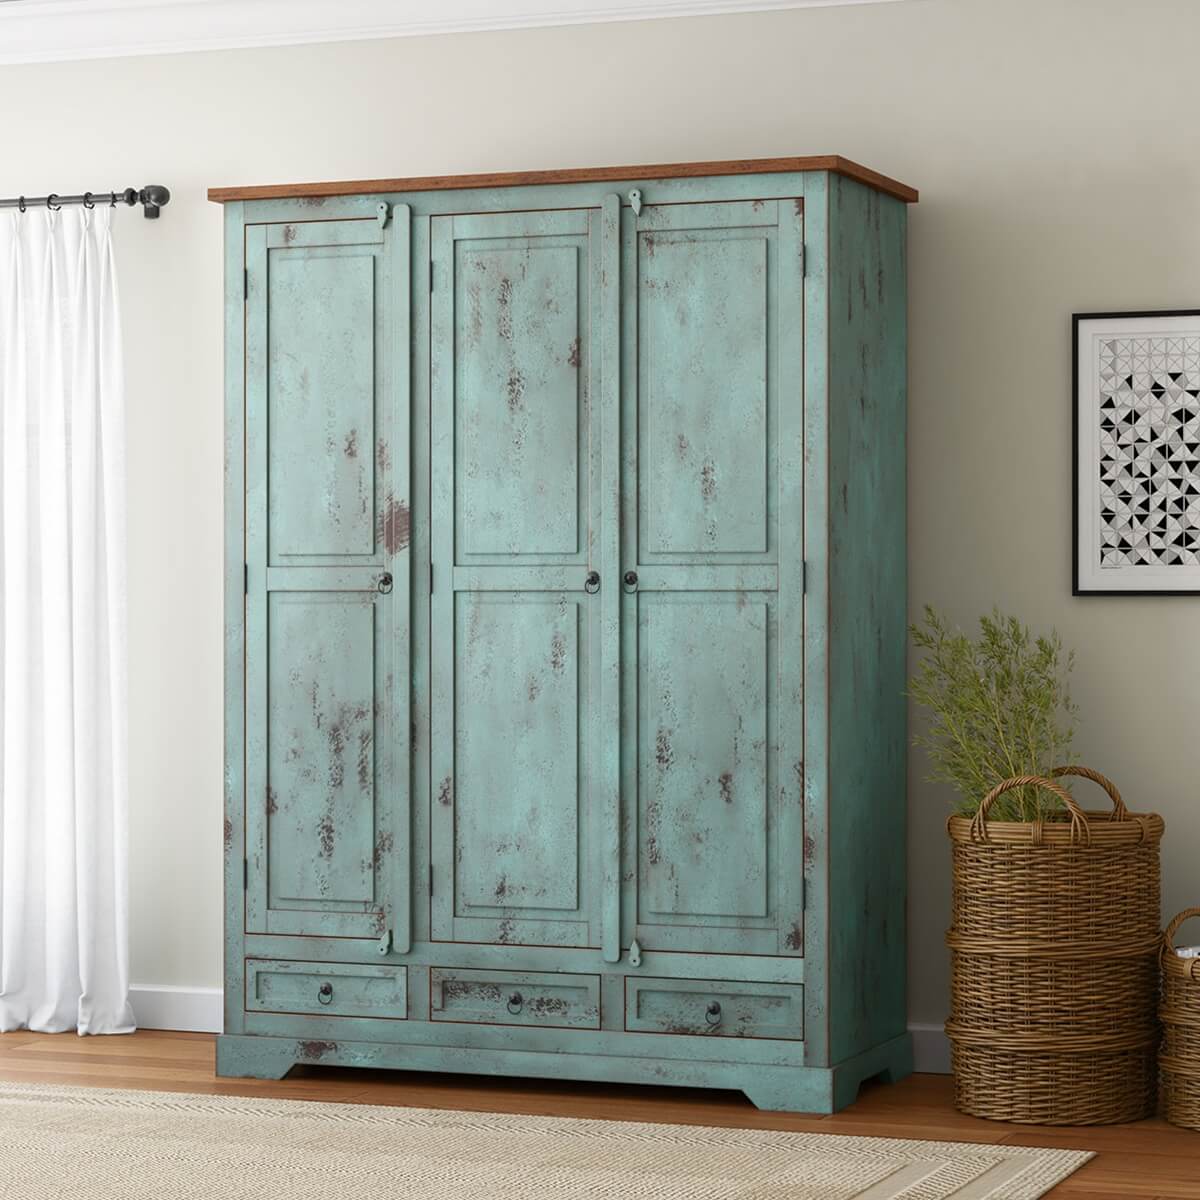 Scranton Solid Wood Rustic Armoire with Hanging Rod & Drawers.